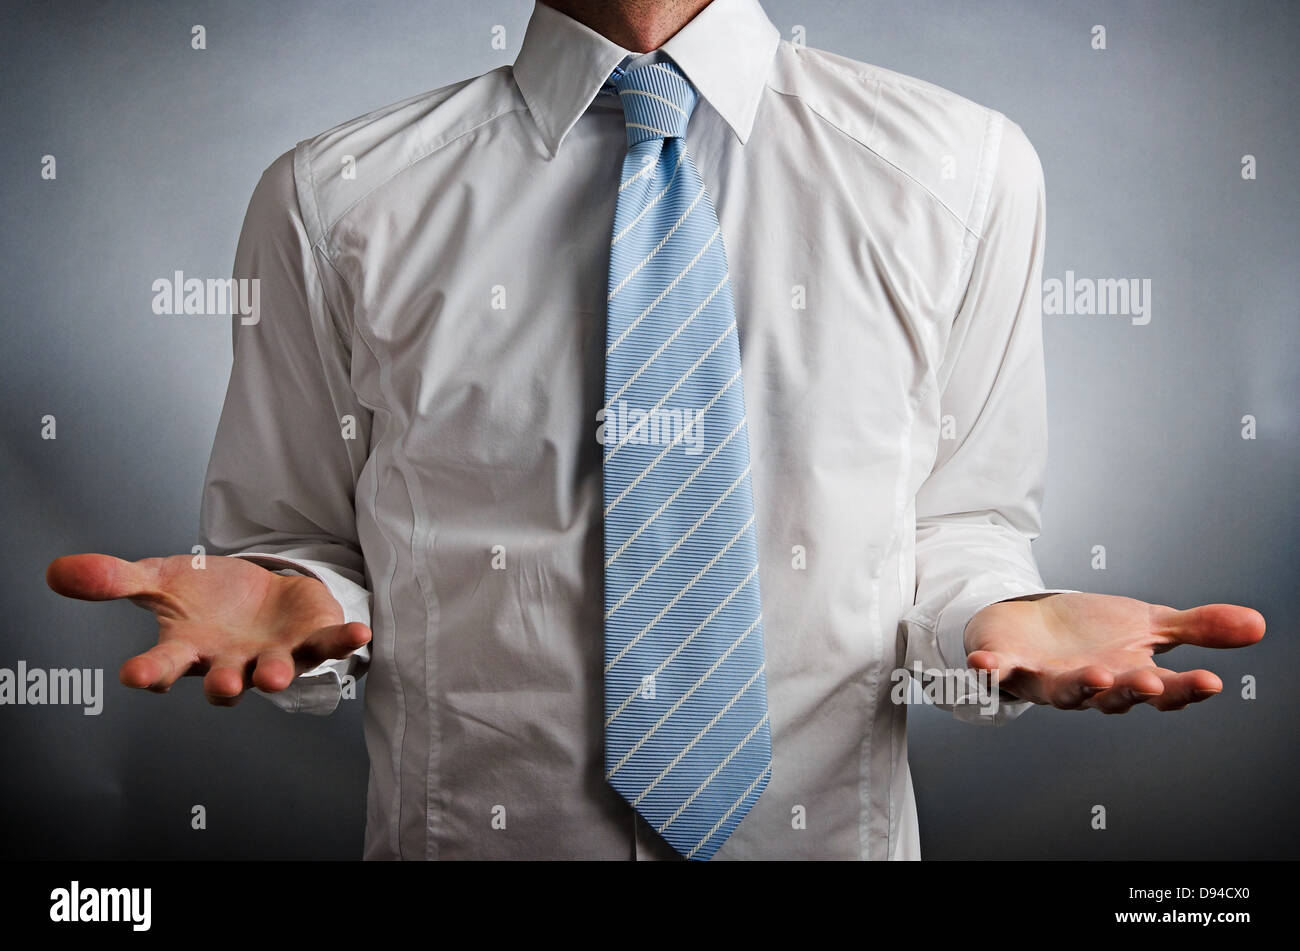 Image of a man wearing a tie making a gesture Stock Photo